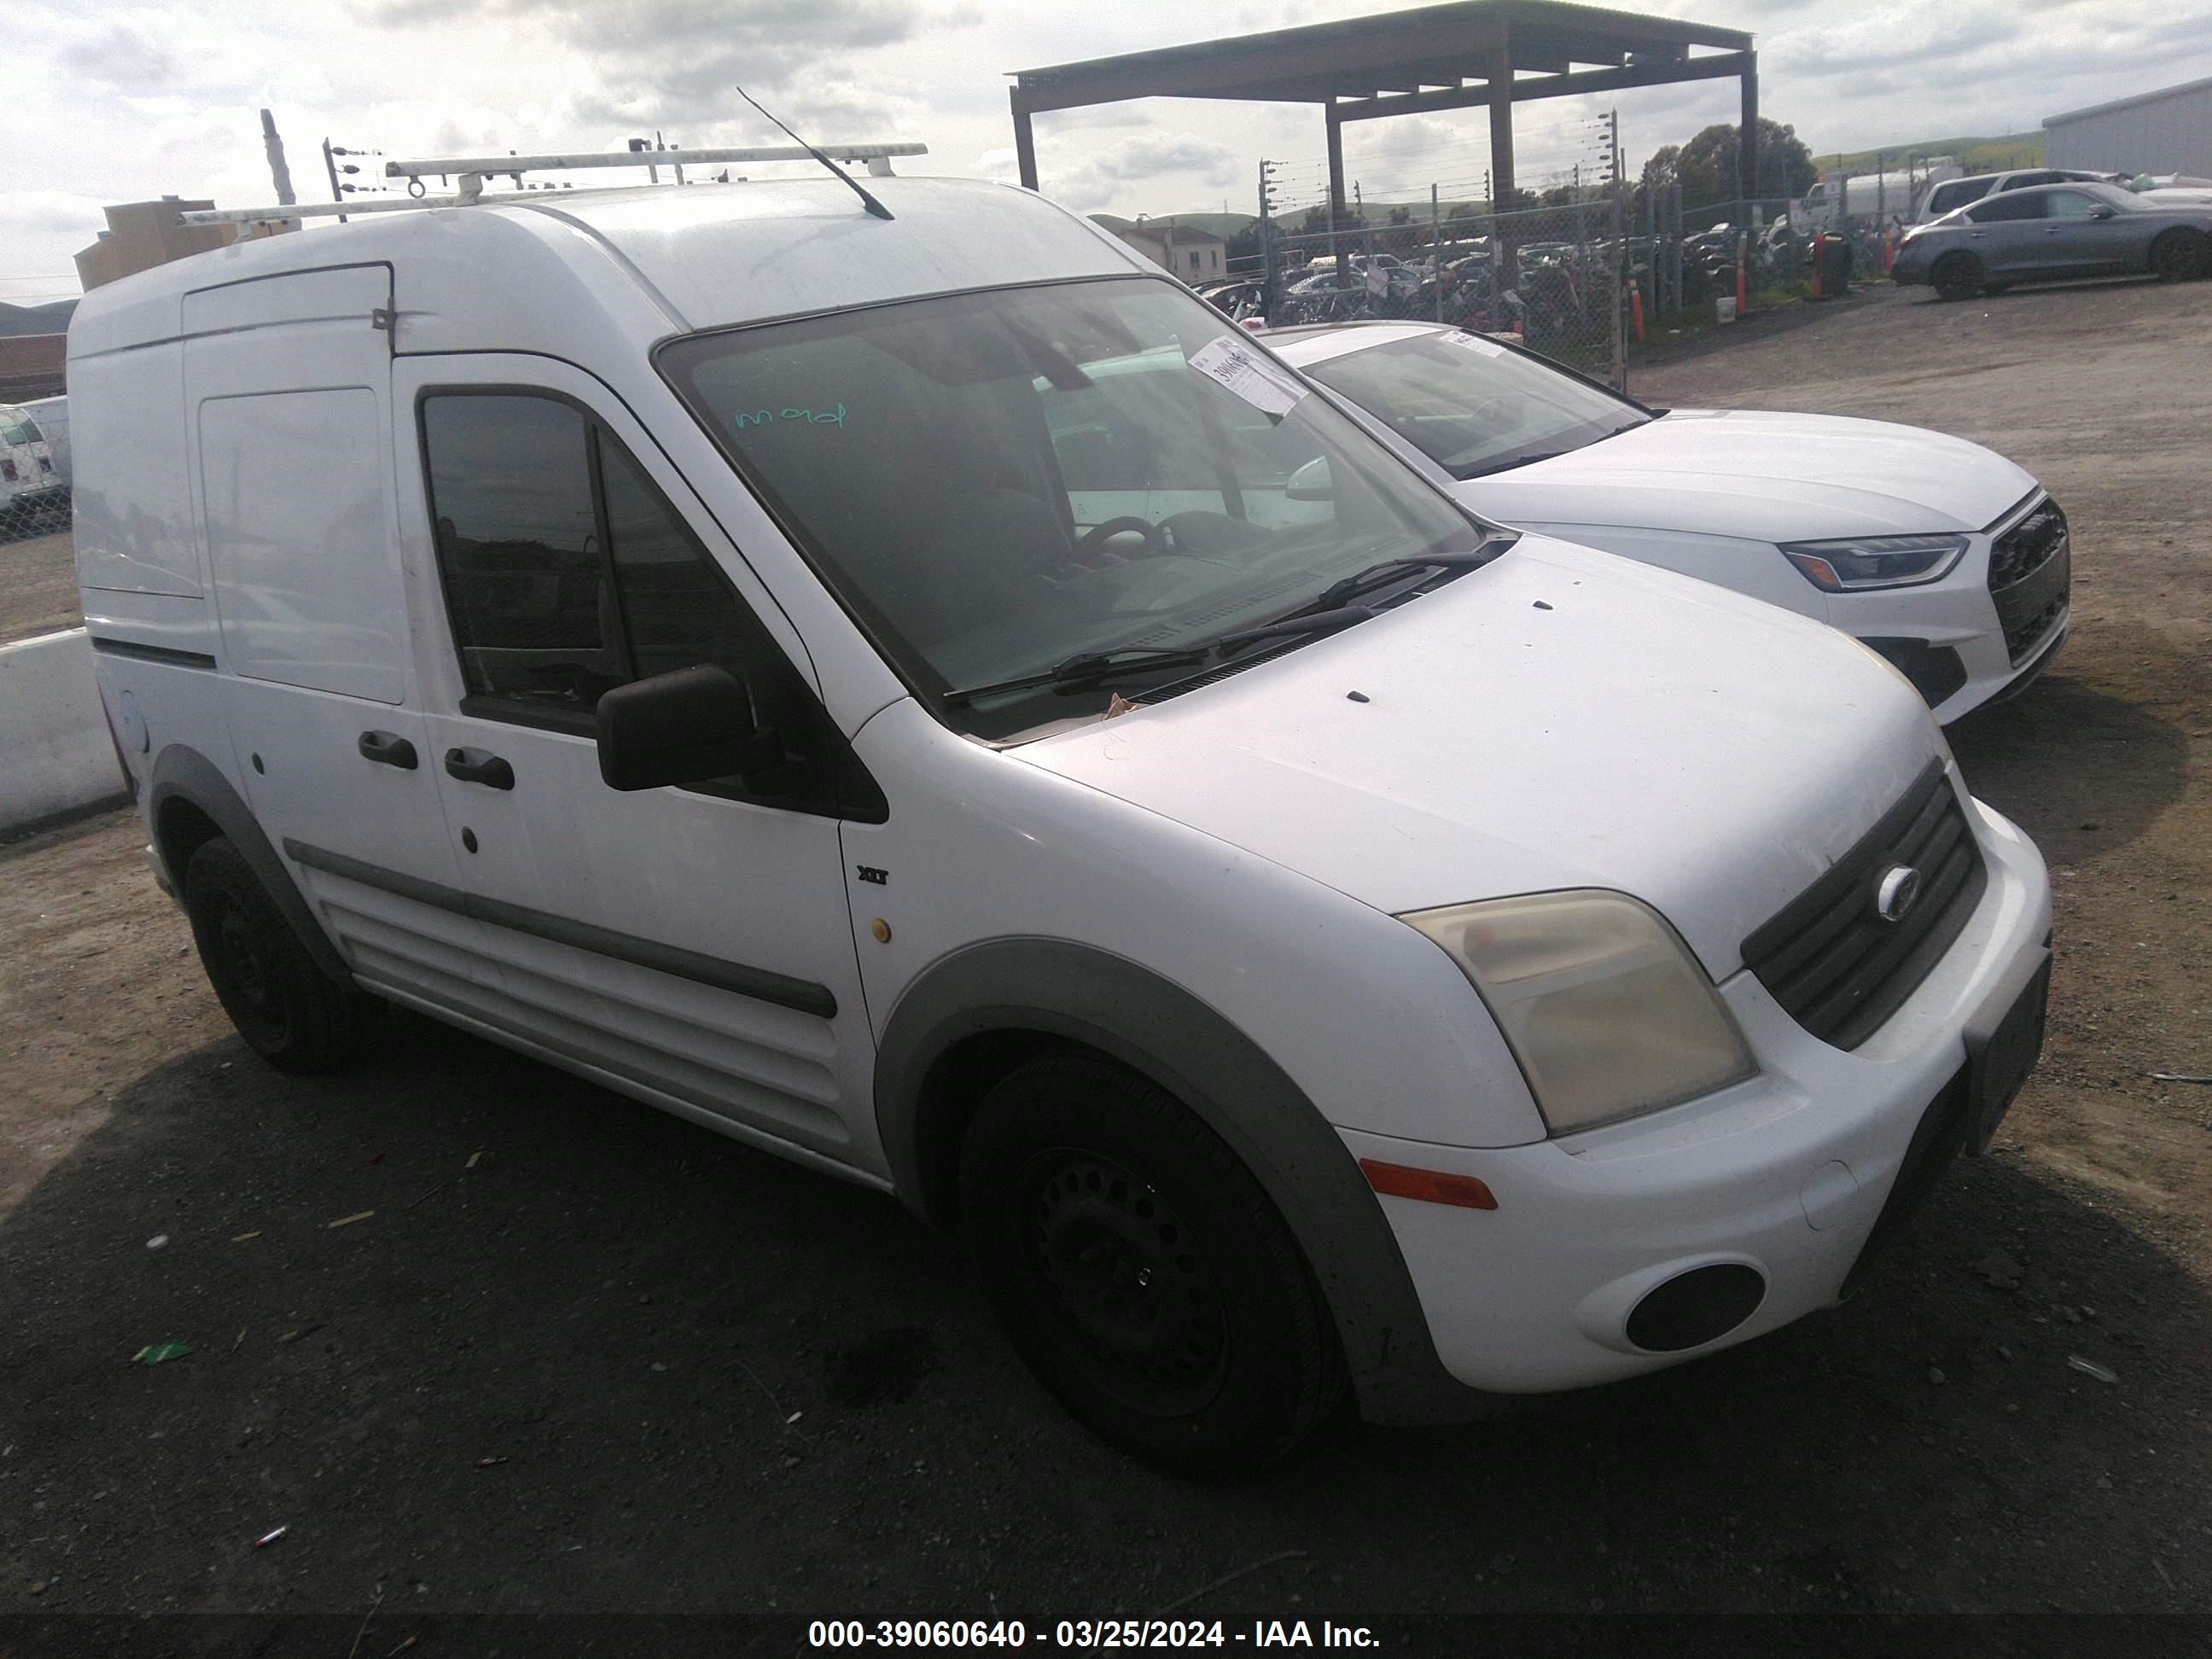 vin: NM0LS7BNXBT053716 NM0LS7BNXBT053716 2011 ford transit 2000 for Sale in 94565, 2780 Willow Pass Road, Bay Point, California, USA